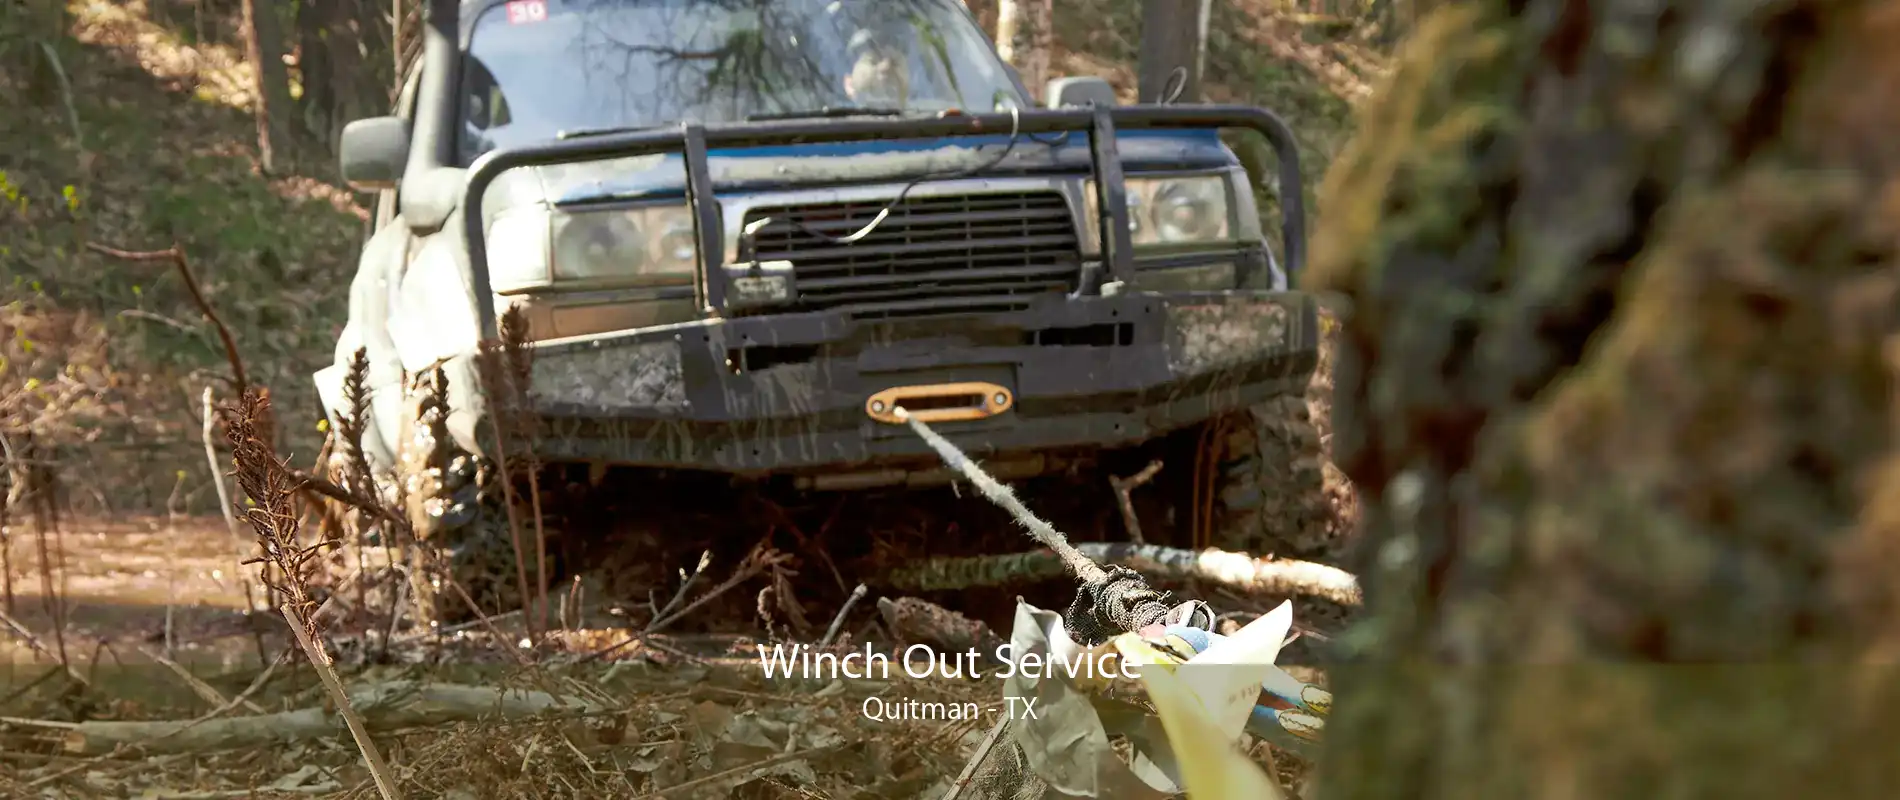 Winch Out Service Quitman - TX